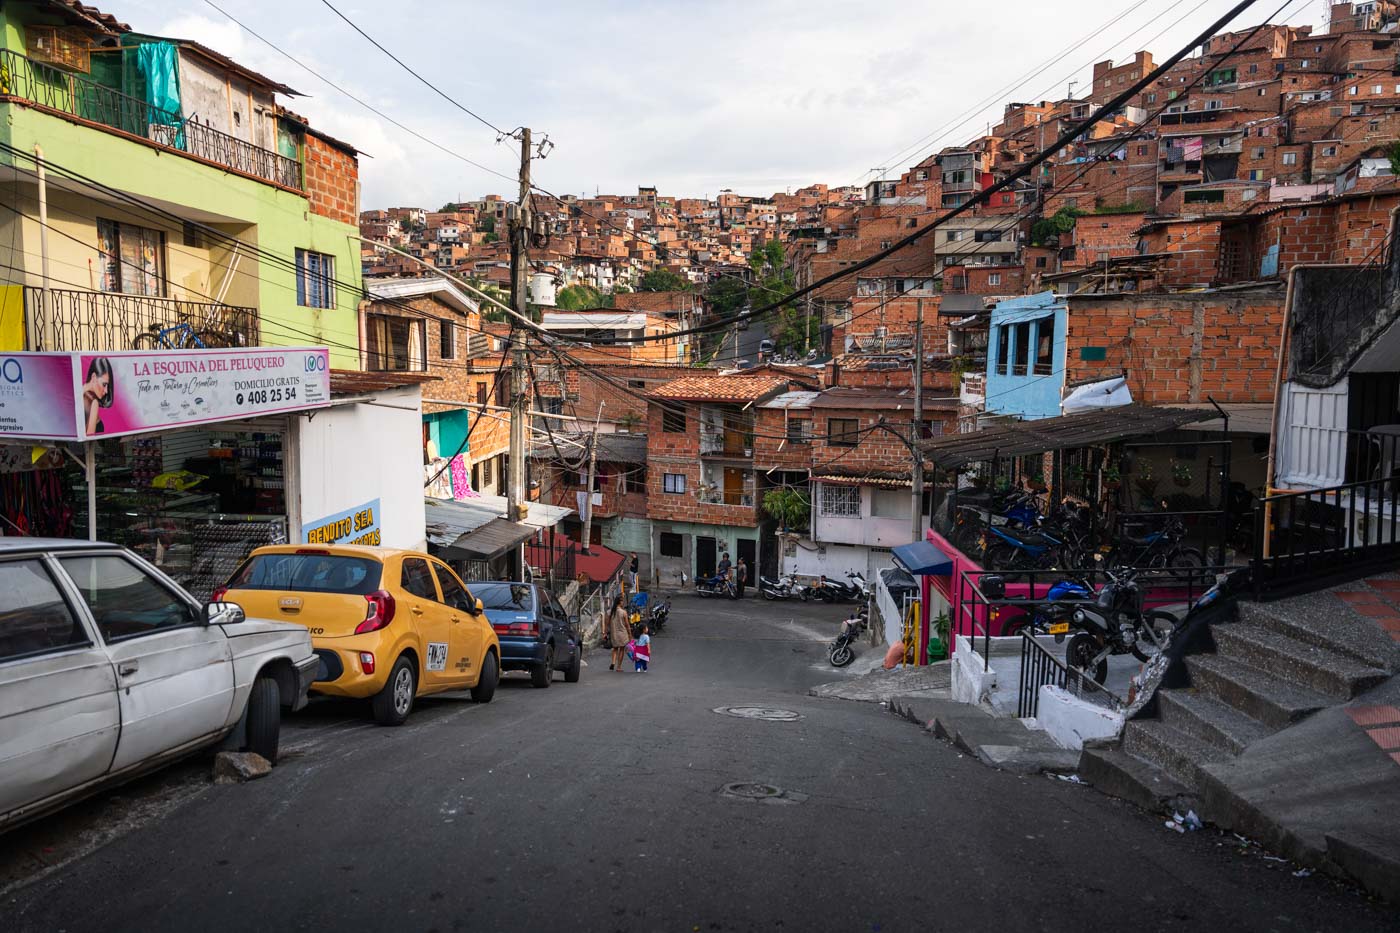 A mother walking her child on a ground level street with favelas behind.